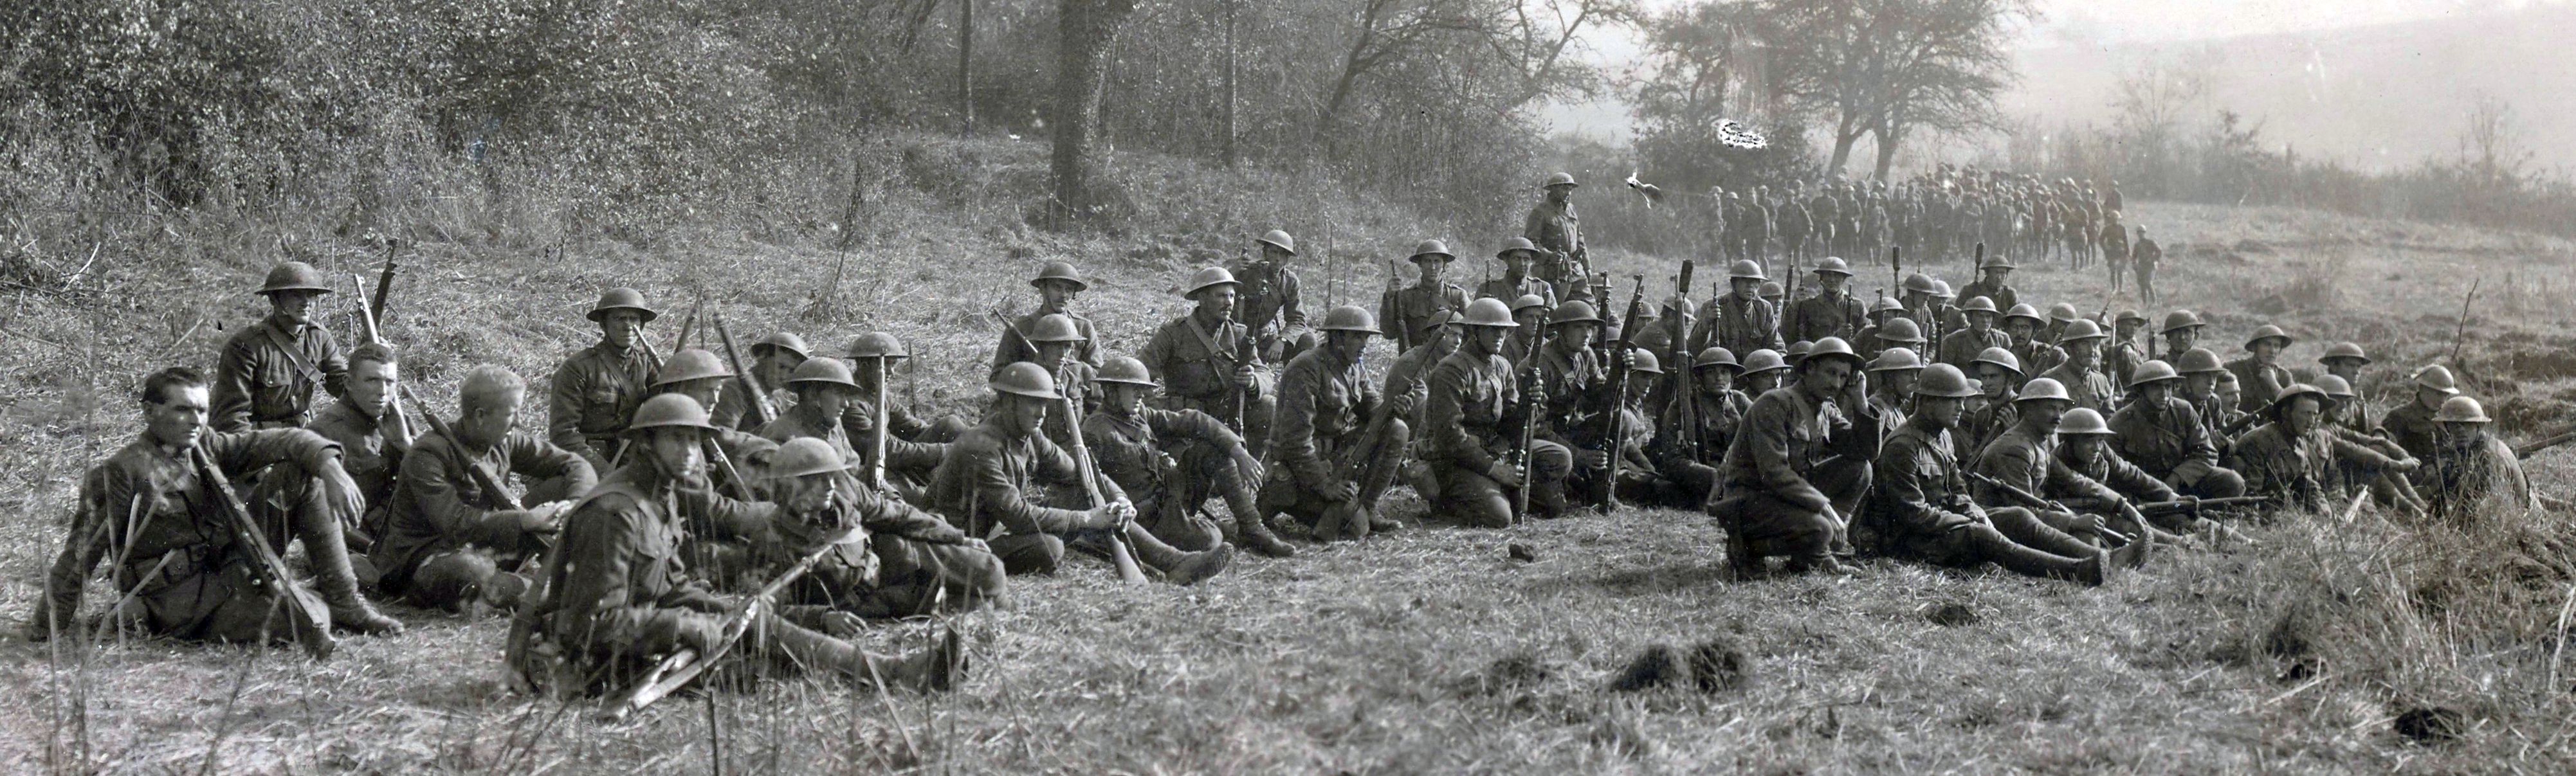 Survivors of the Lost Battalion's ordeal rest after being rescued. National Archives.